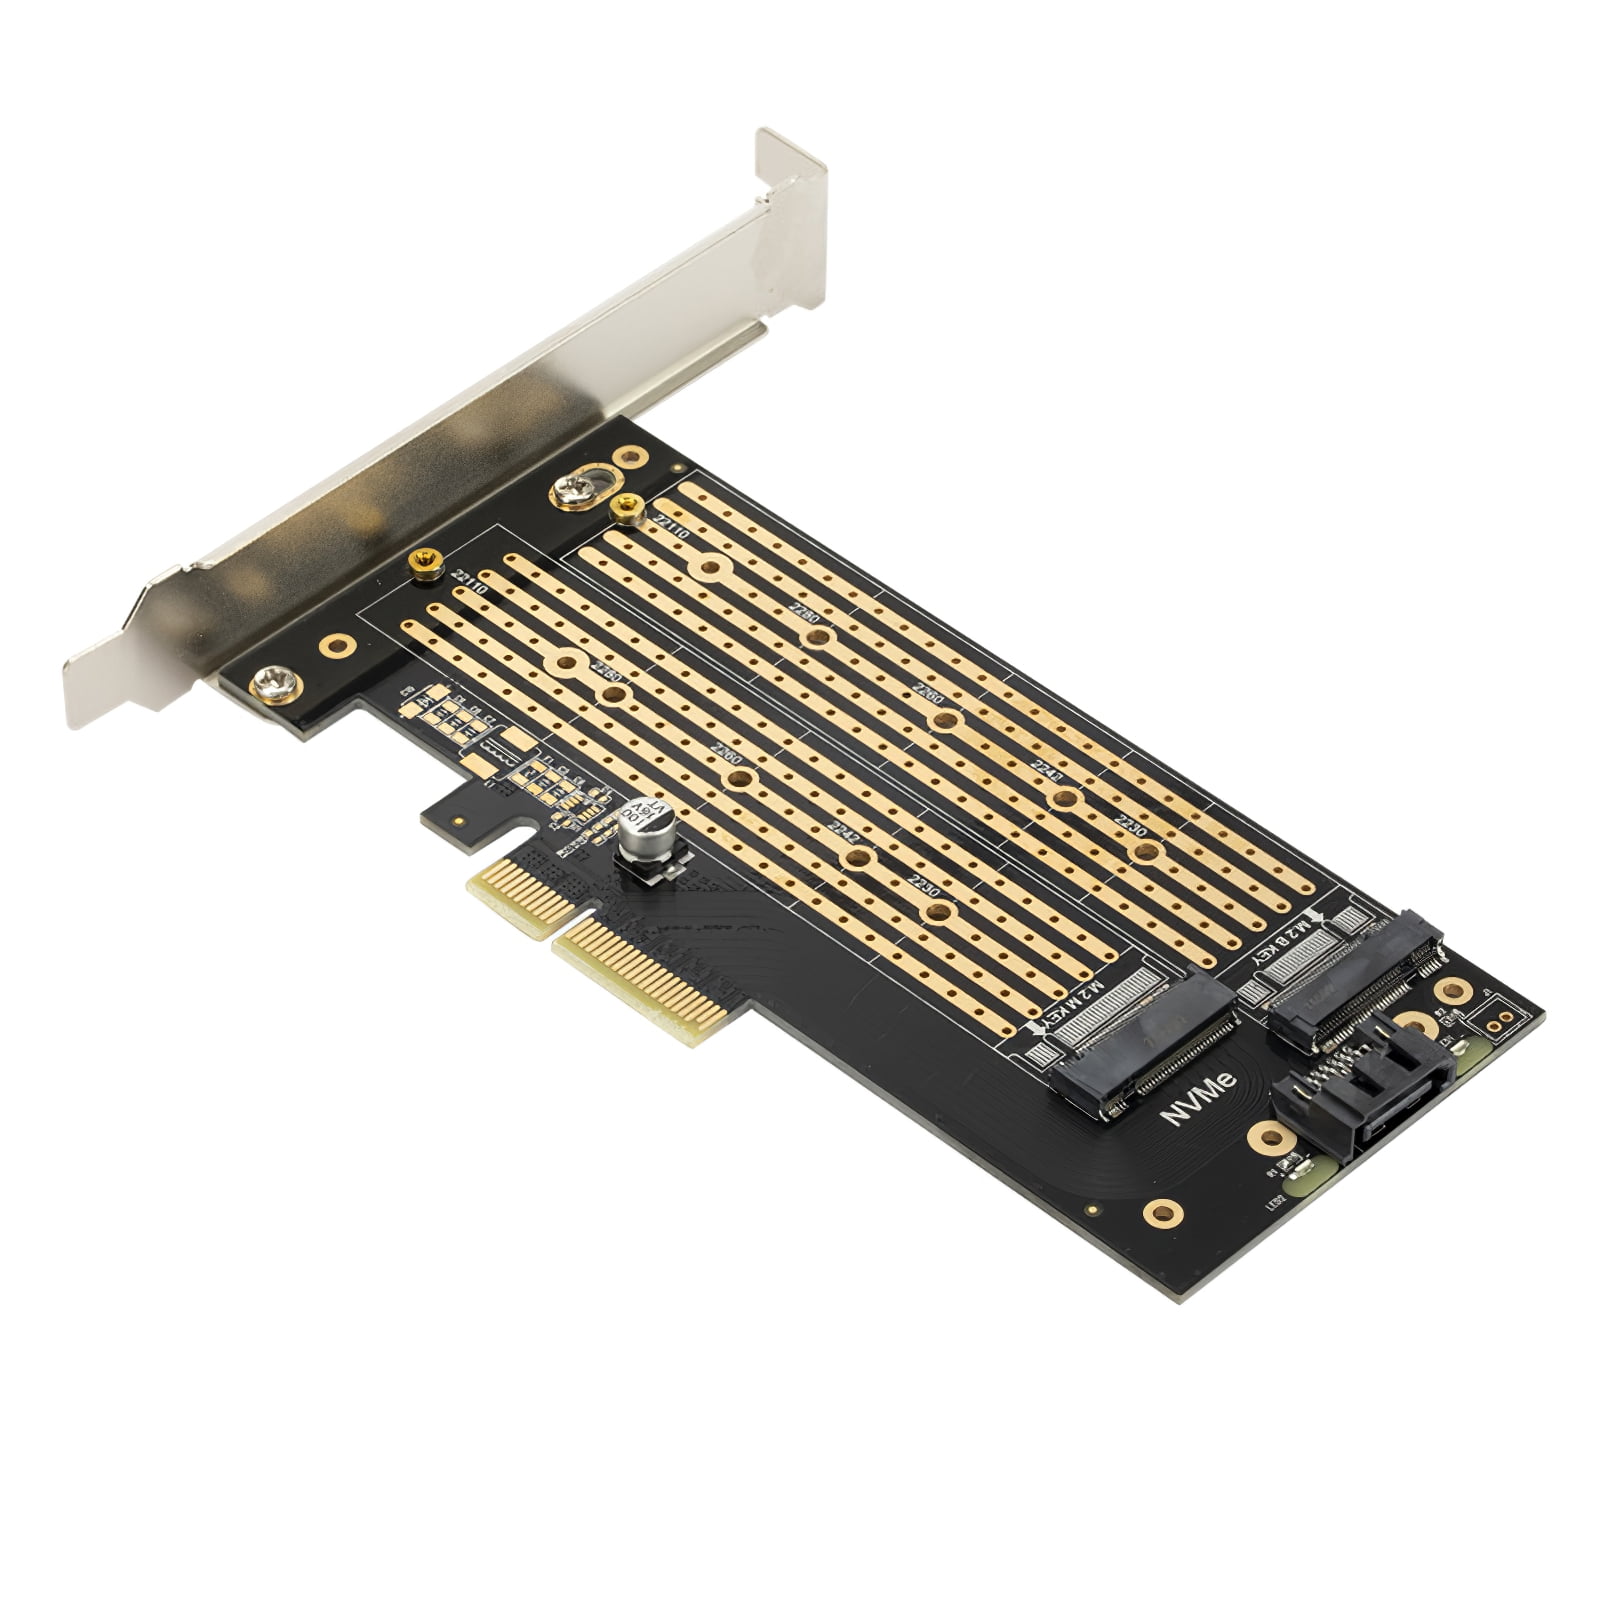 M.2 PCIe SSD to PCIe 3.0 x4 and M.2 SATA SSD to SATA III Adapter Card